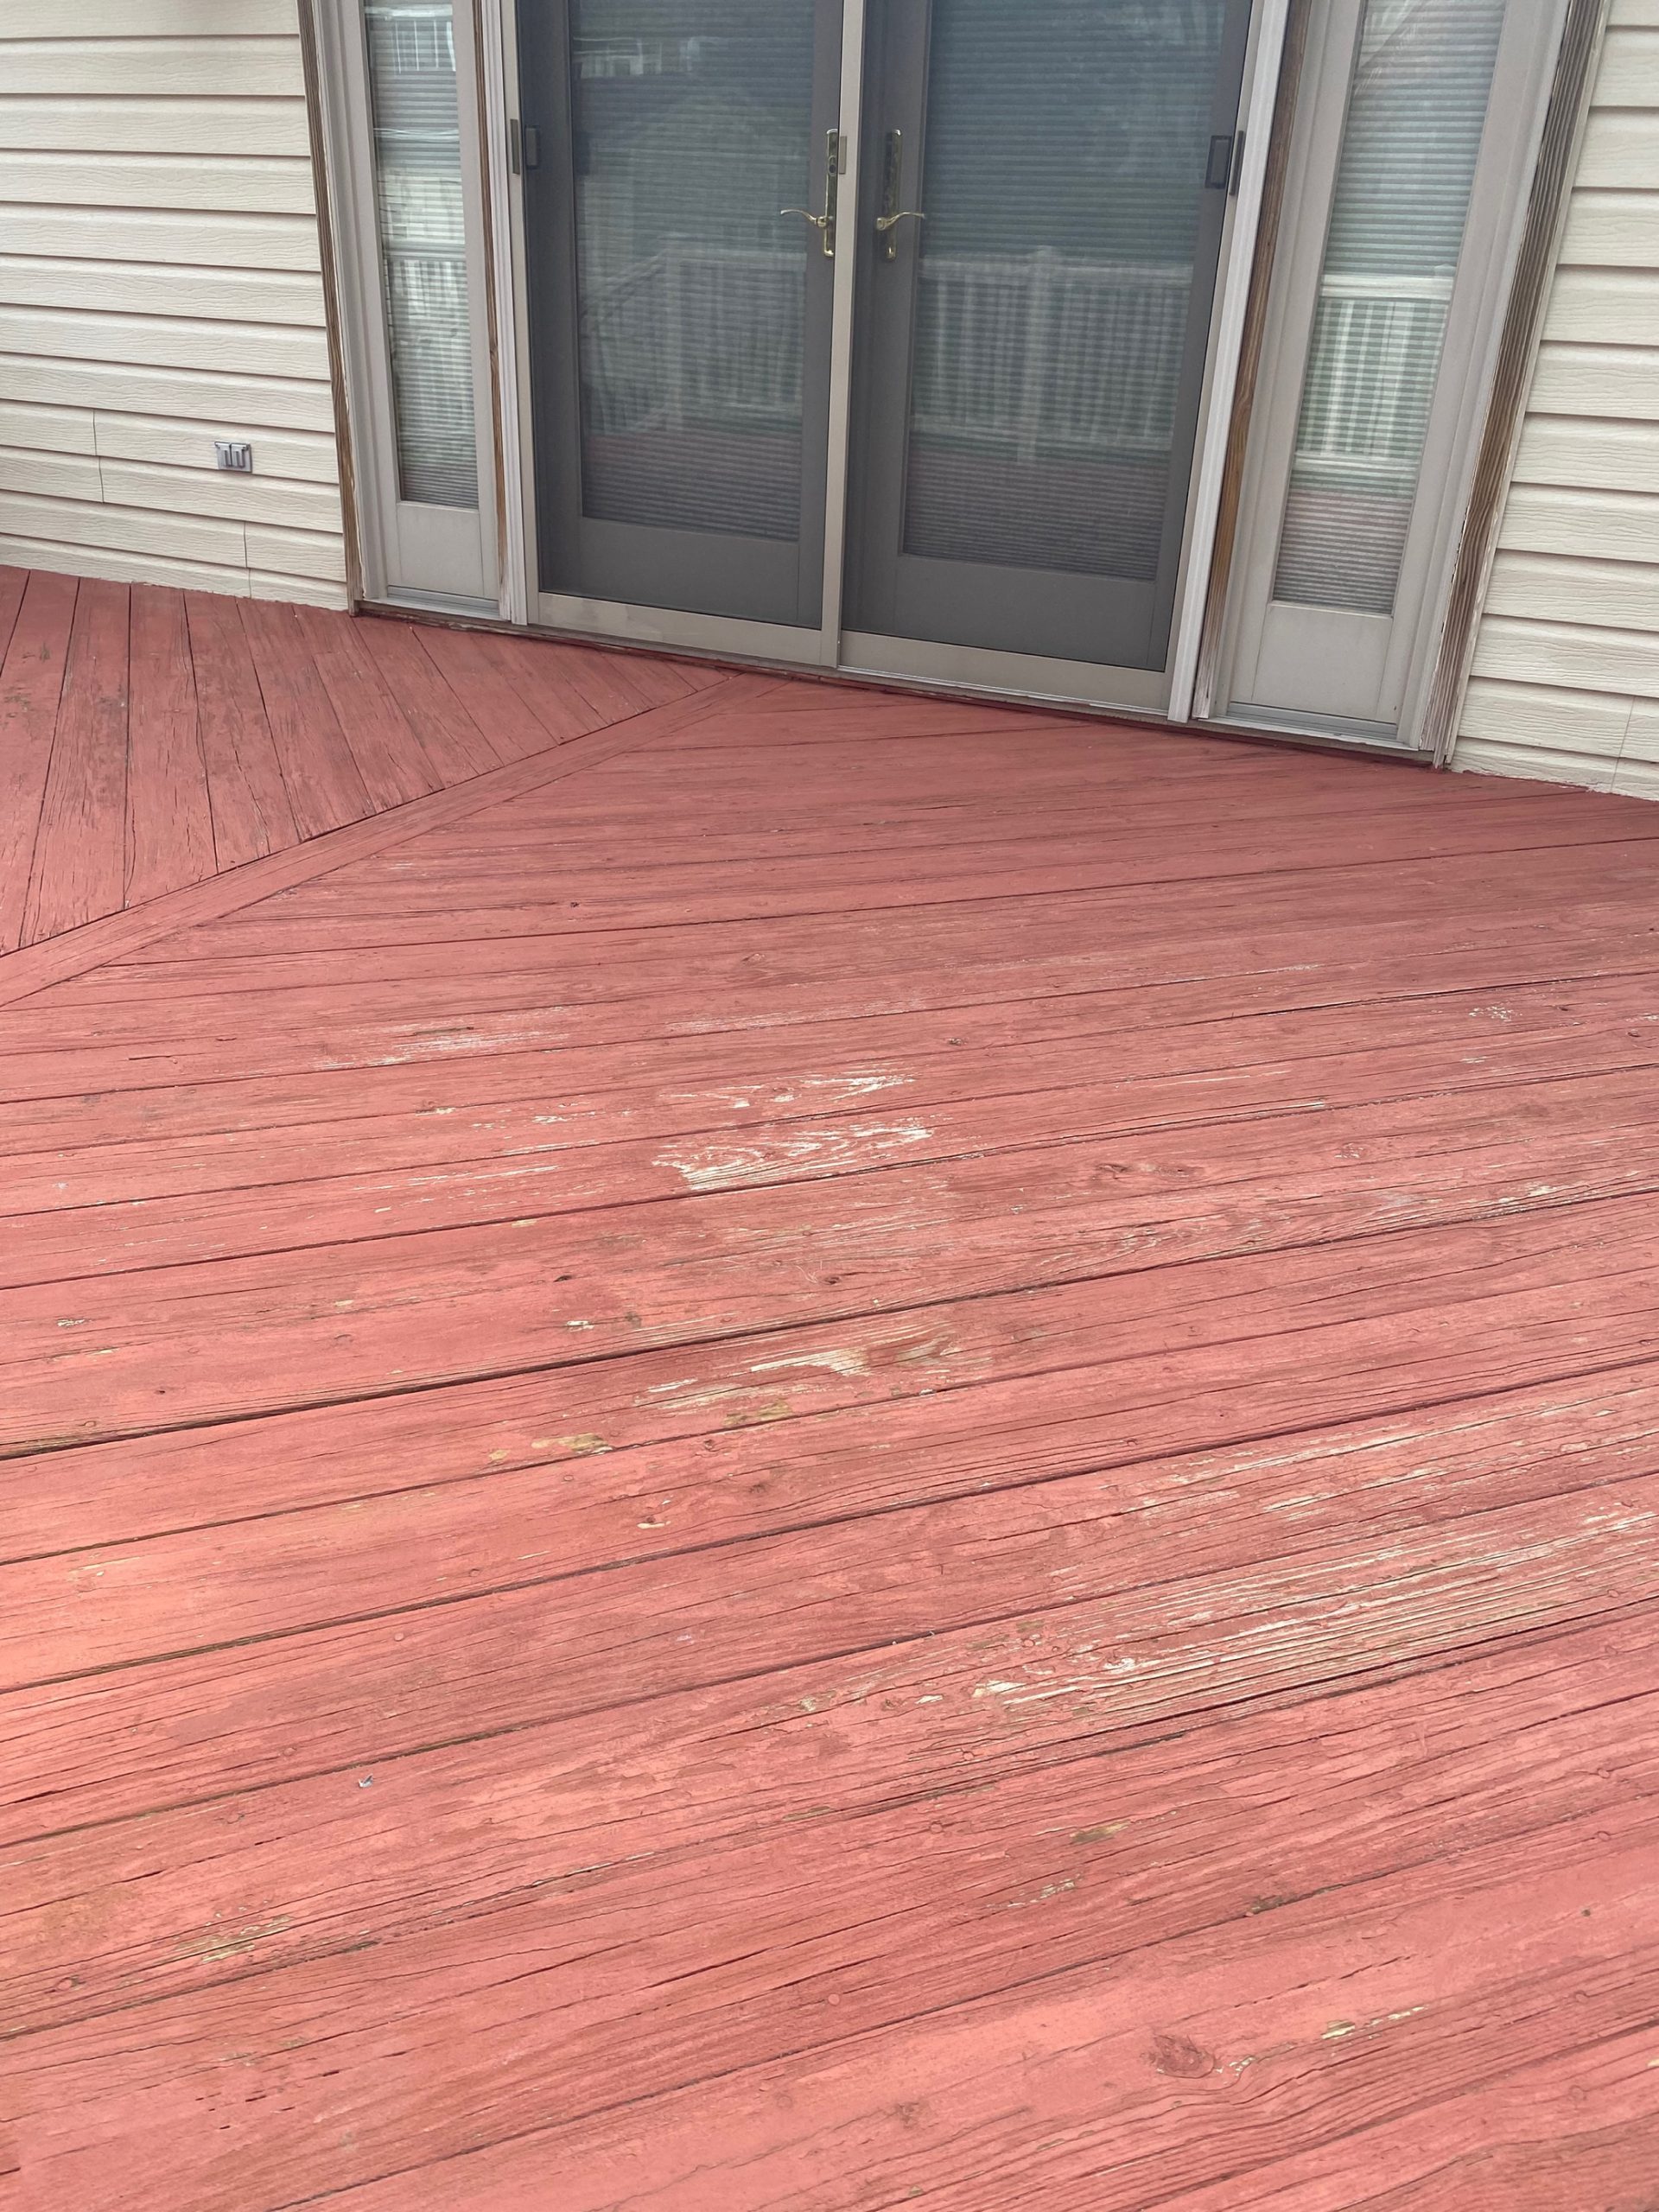 Before Deck Painting with faded and chipped paint